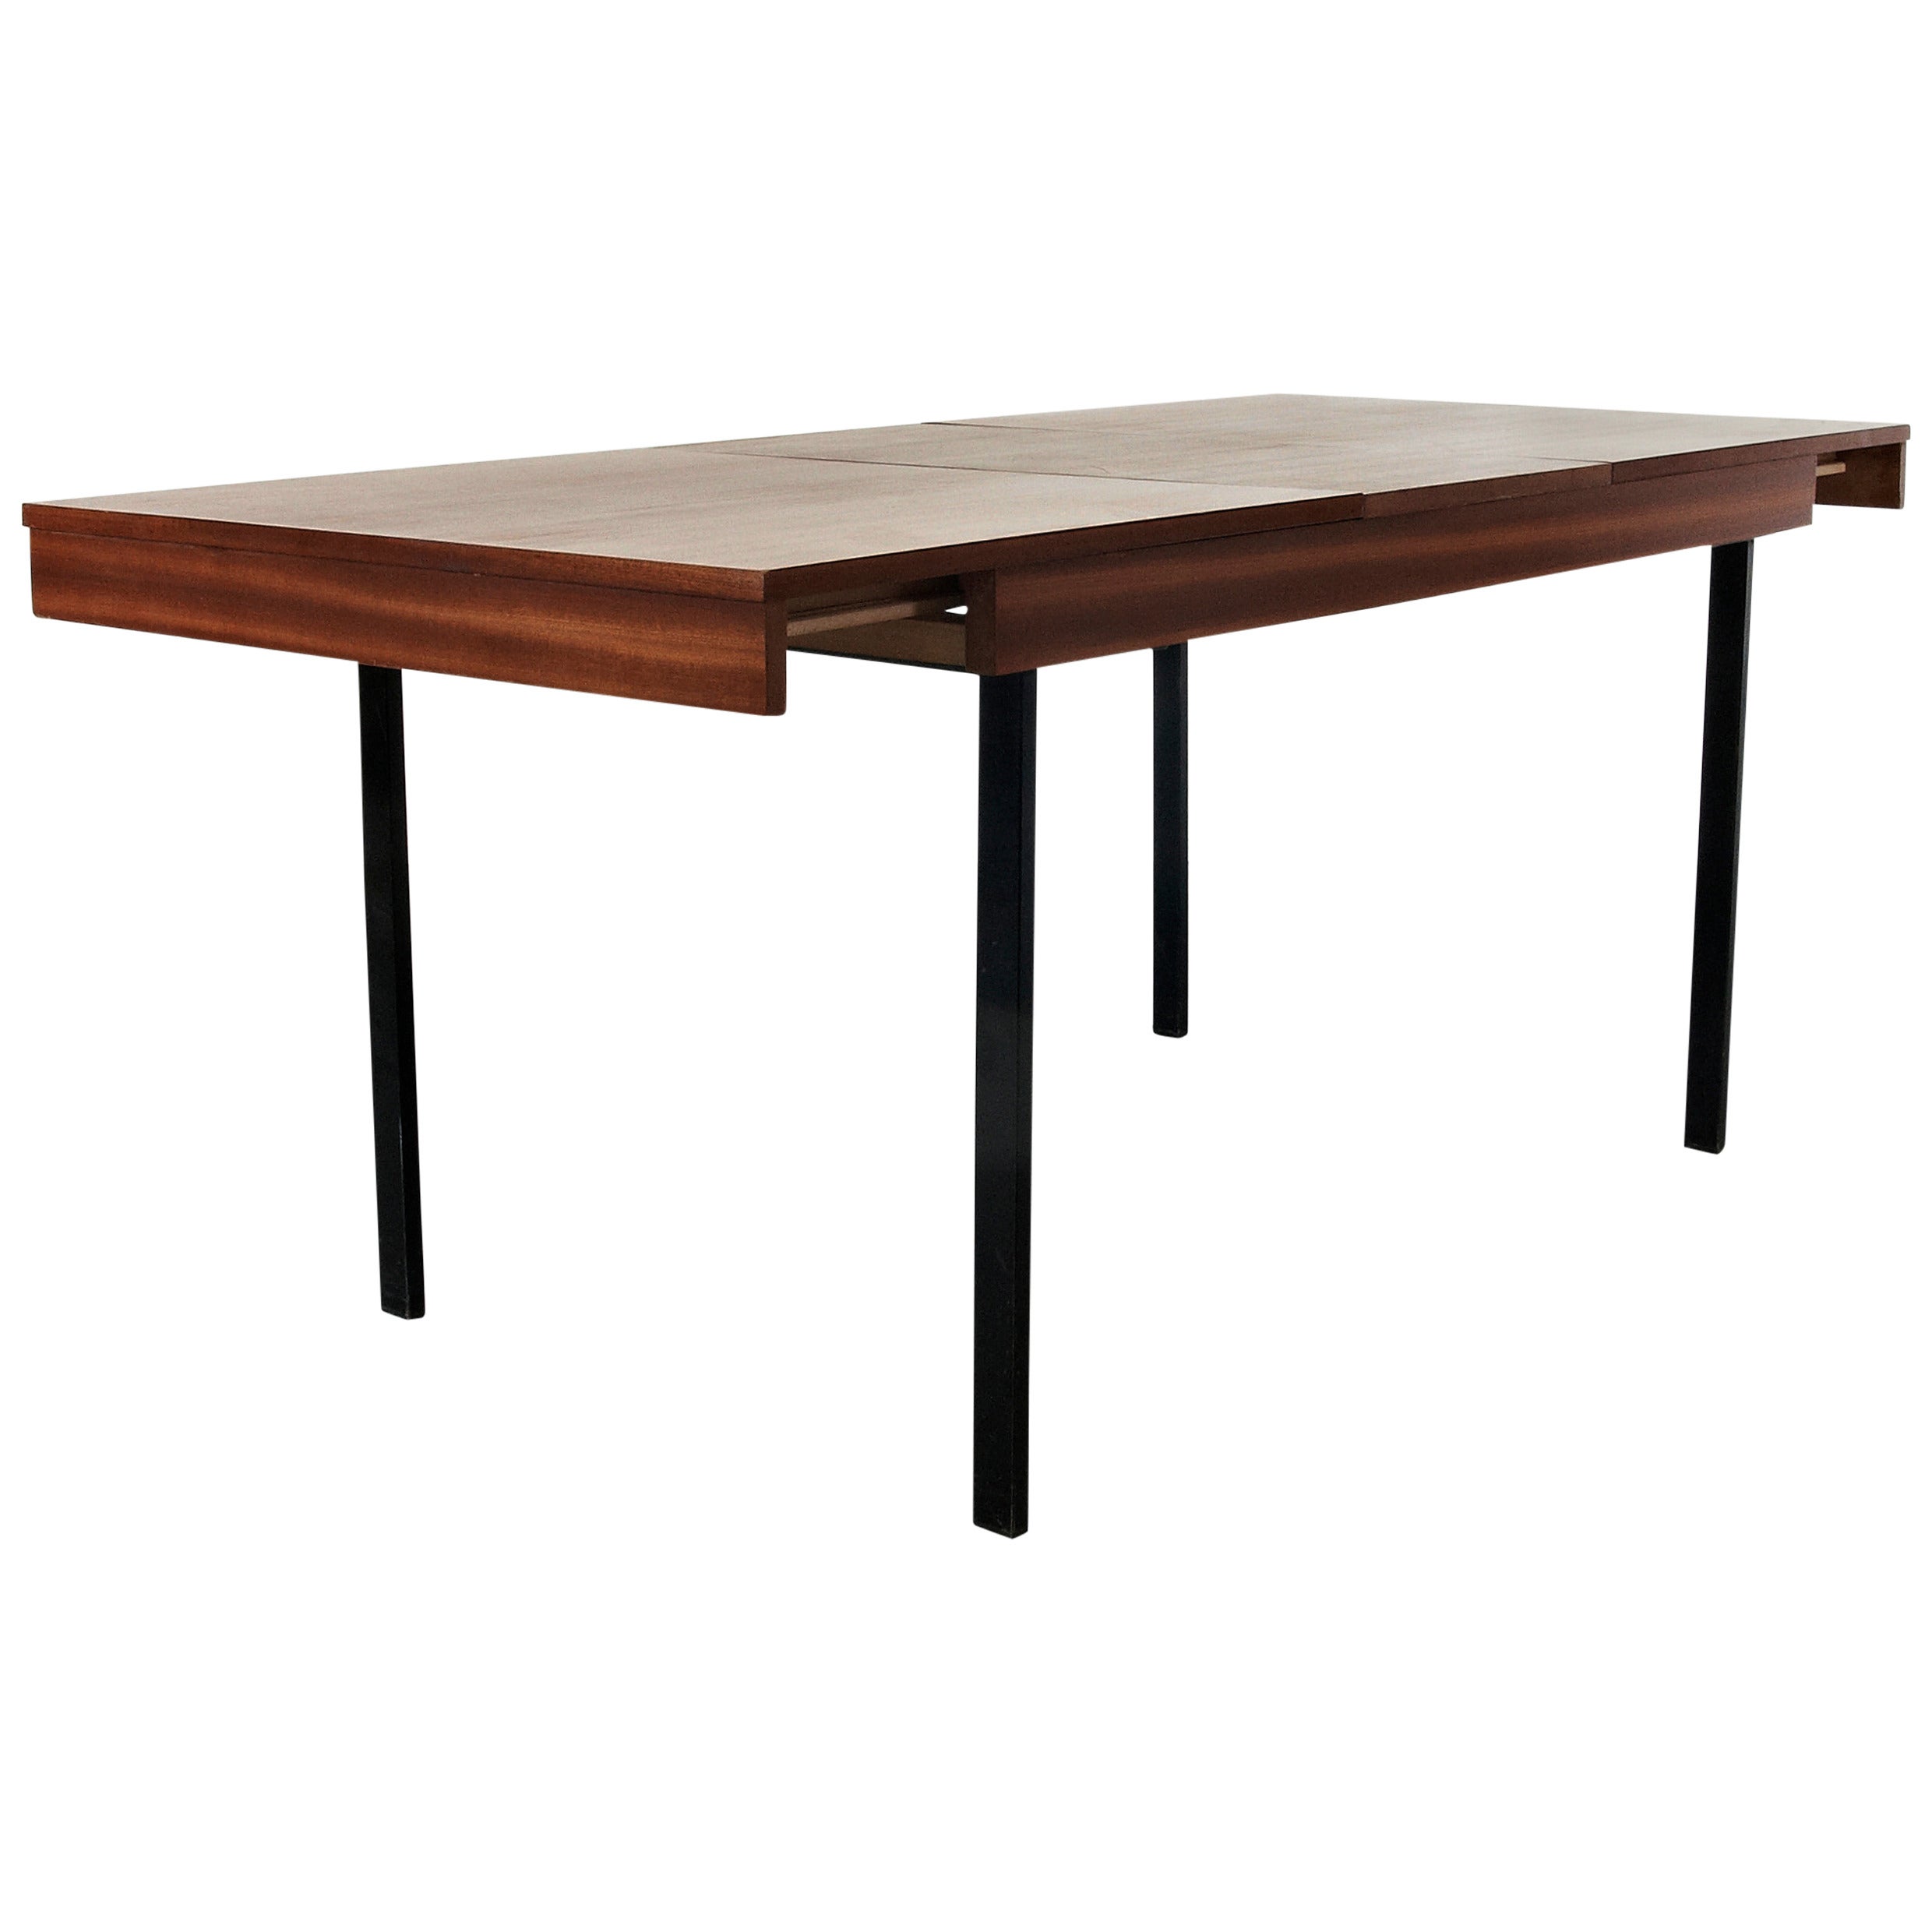 Pierre Guariche Adjustable Extension Dining Table for Meurop, circa 1950 For Sale